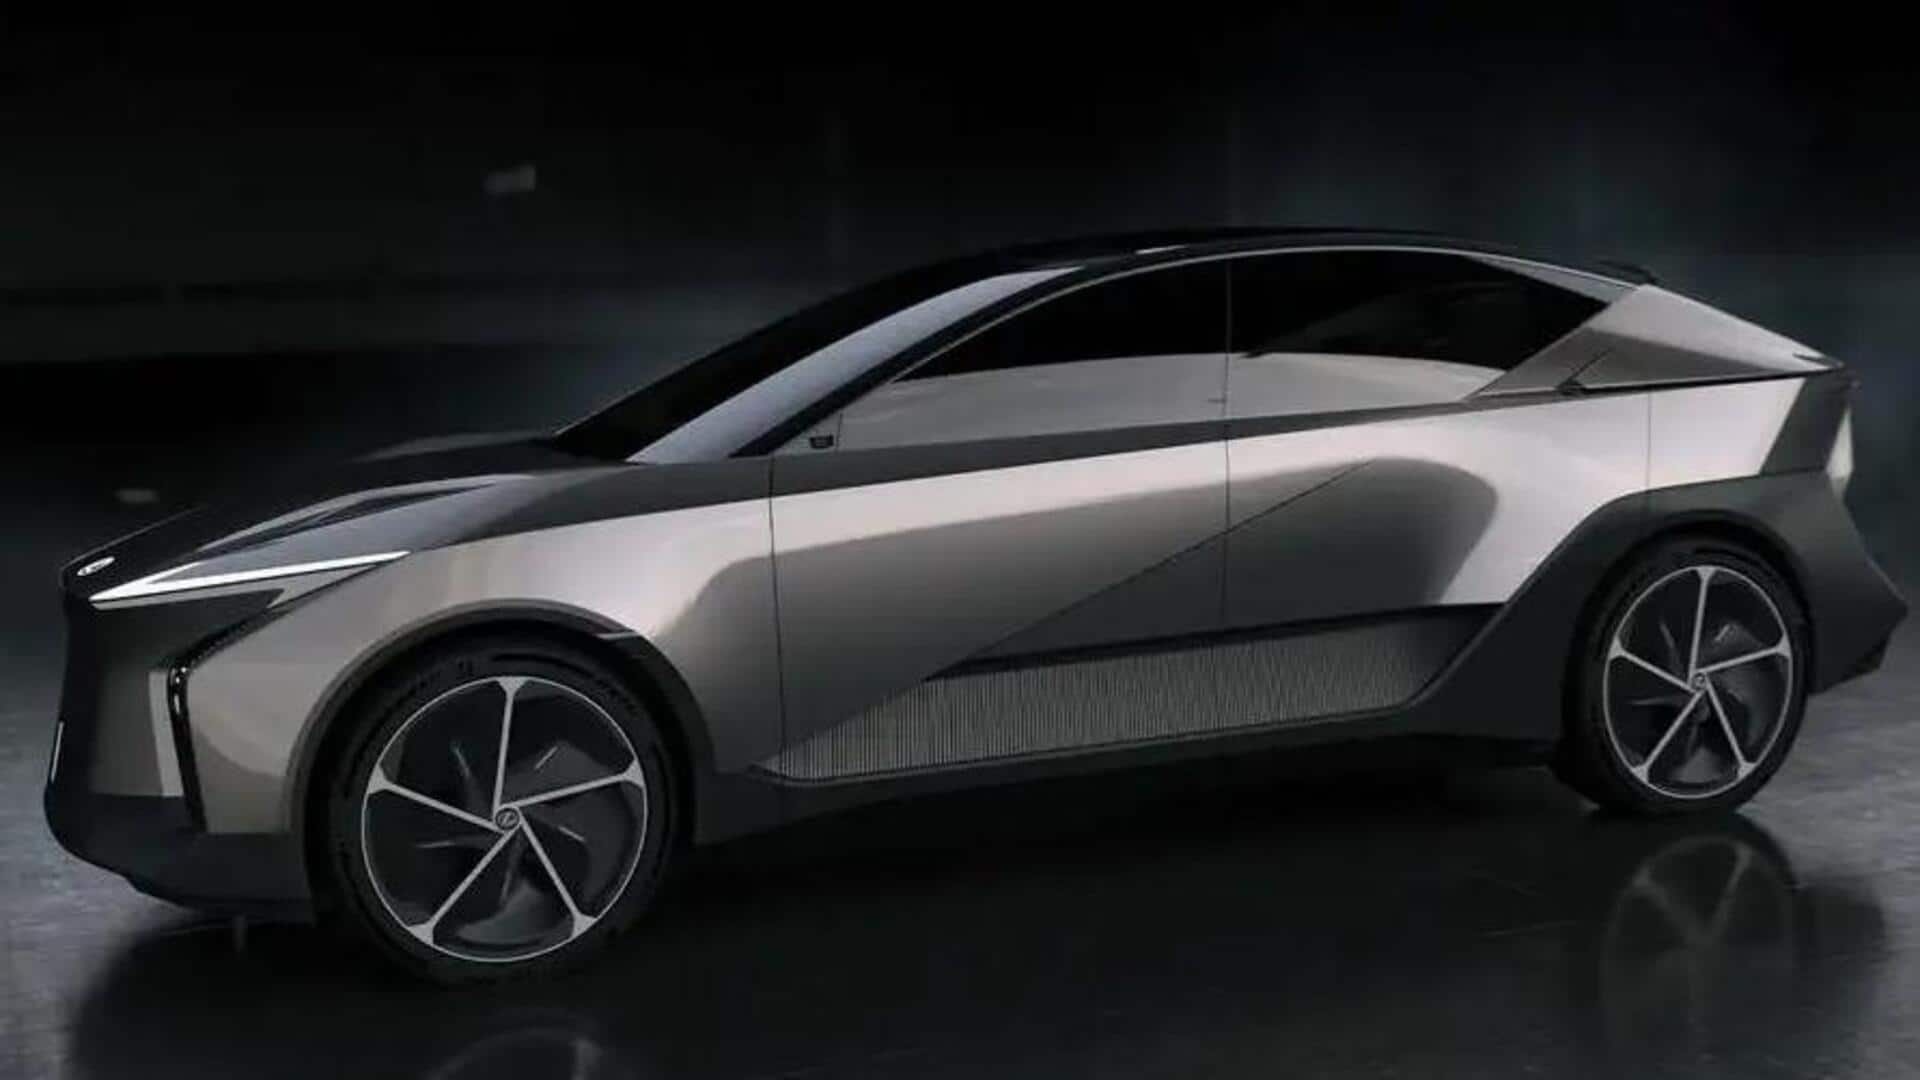 Lexus LF-ZL concept SUV, with stylish looks, breaks cover